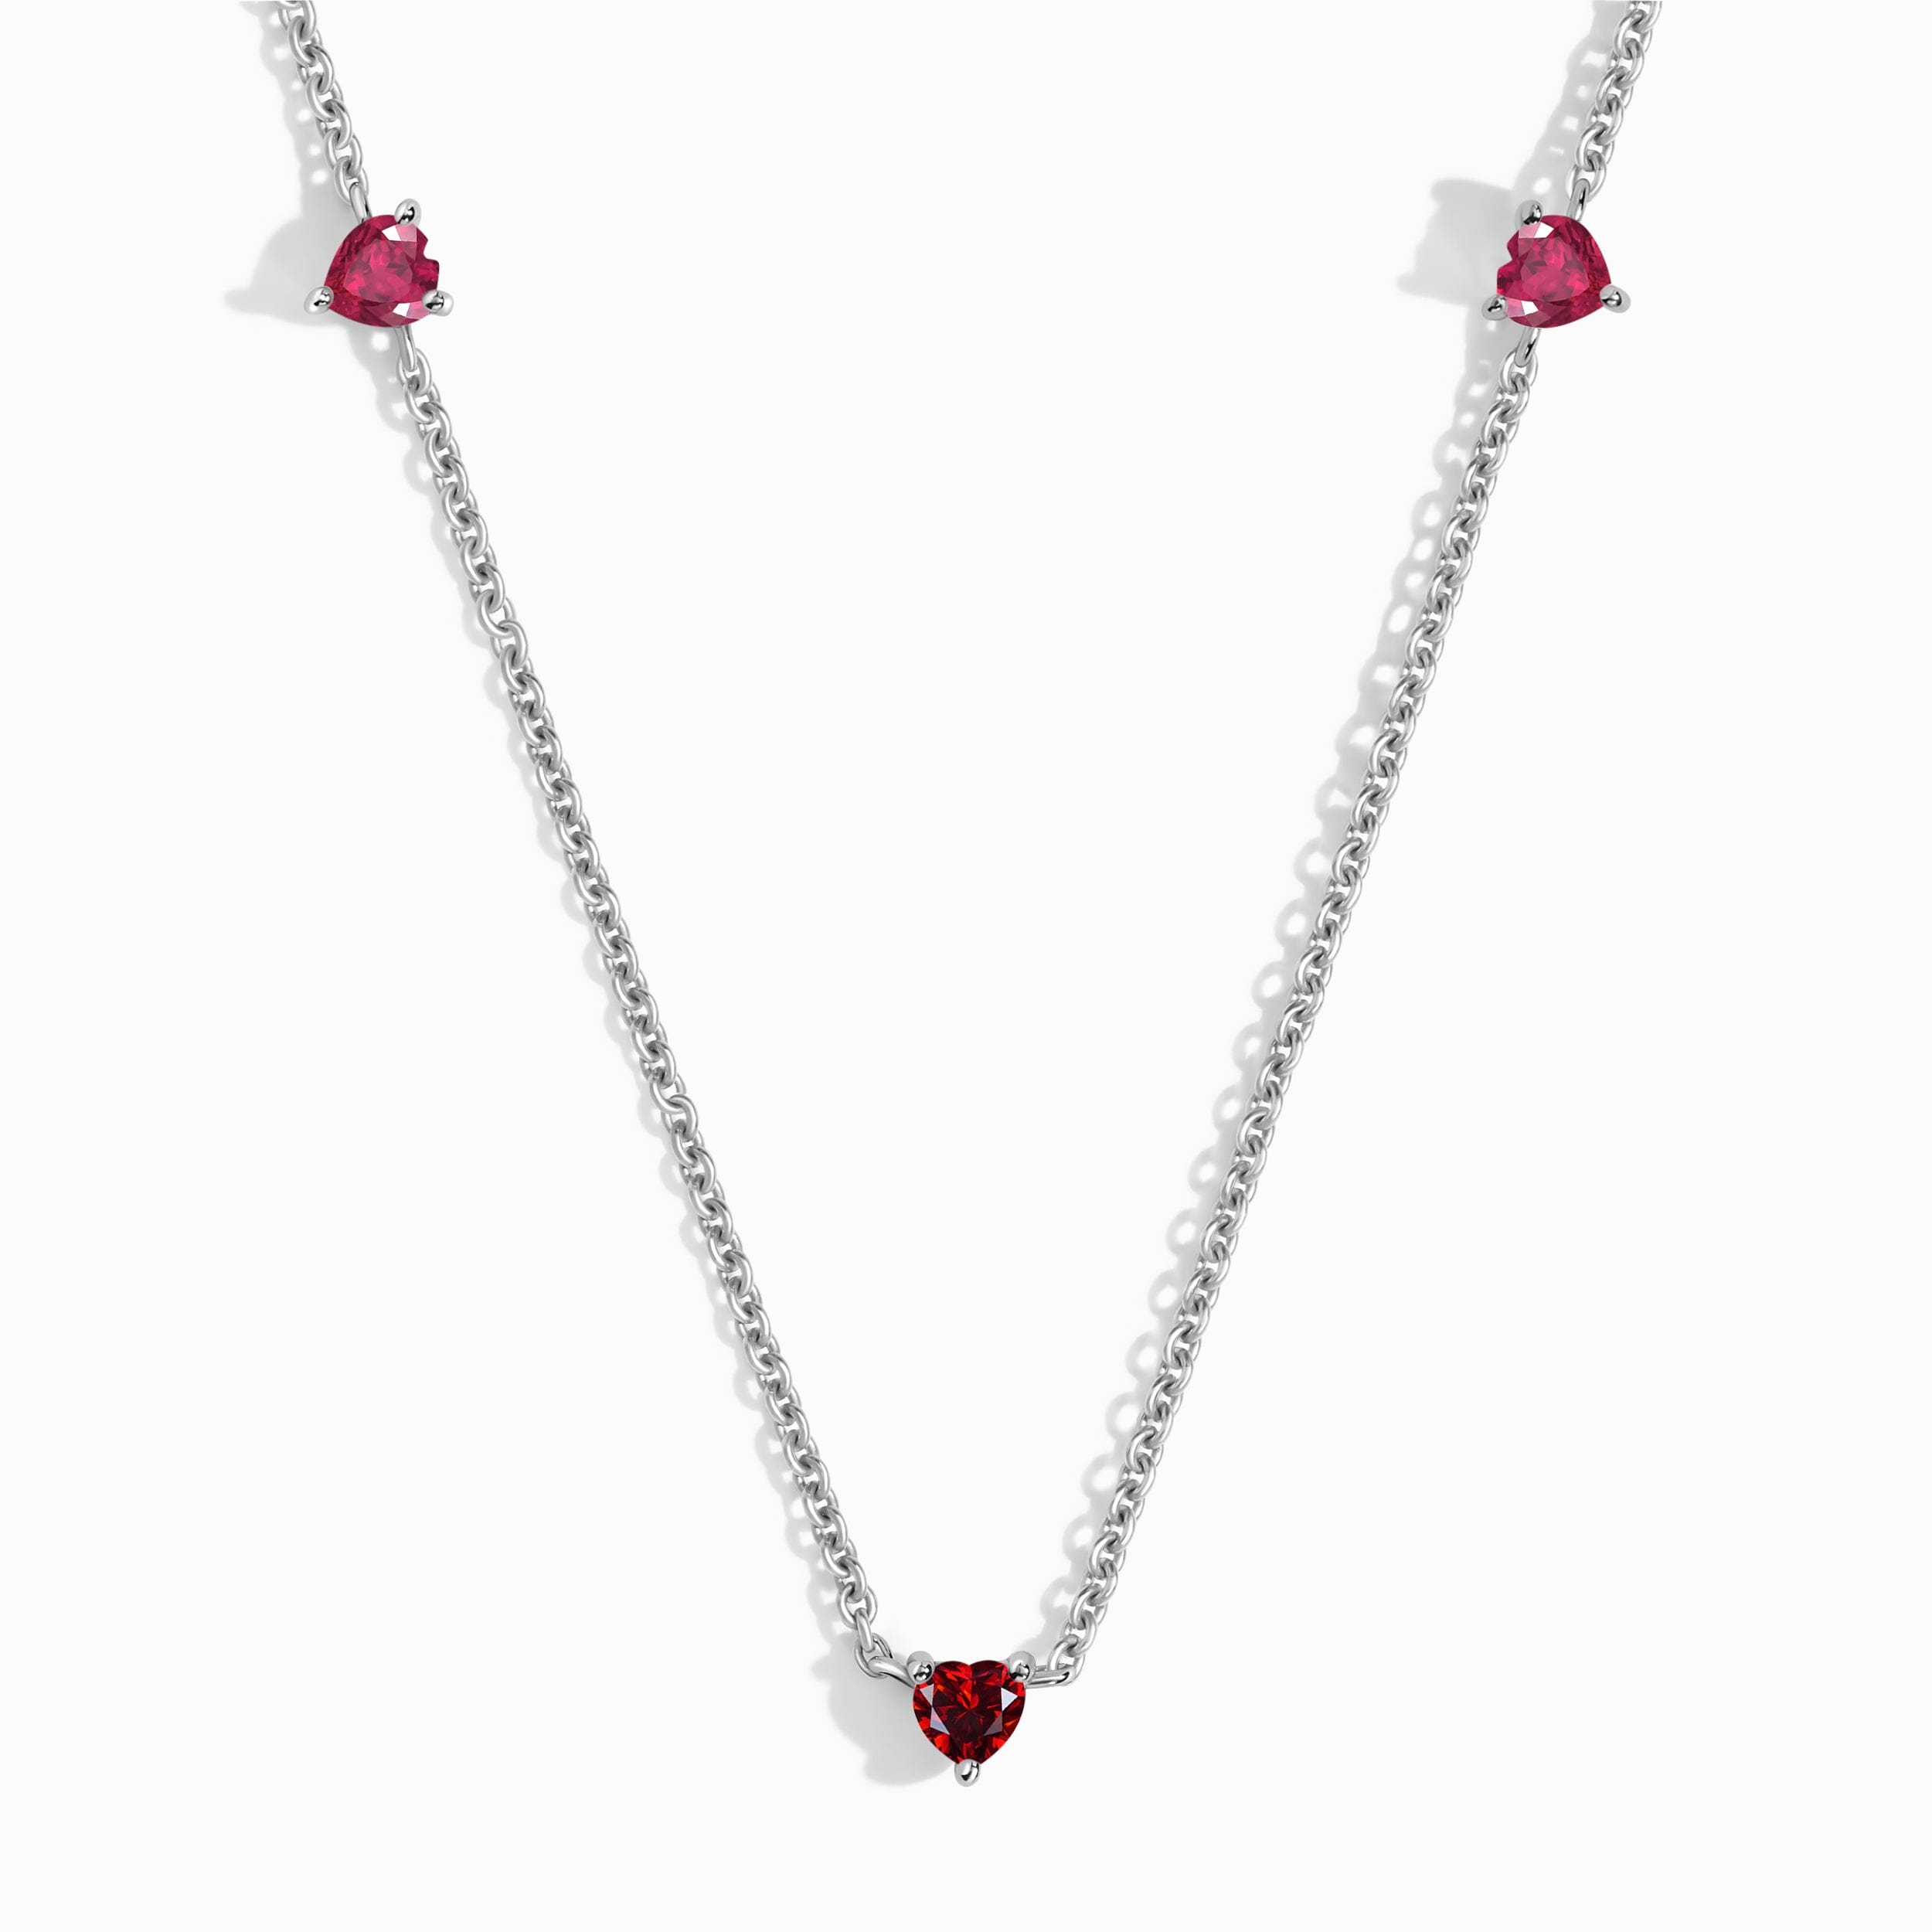 Ruby Garnet Necklace - Never Without You – Moon Magic